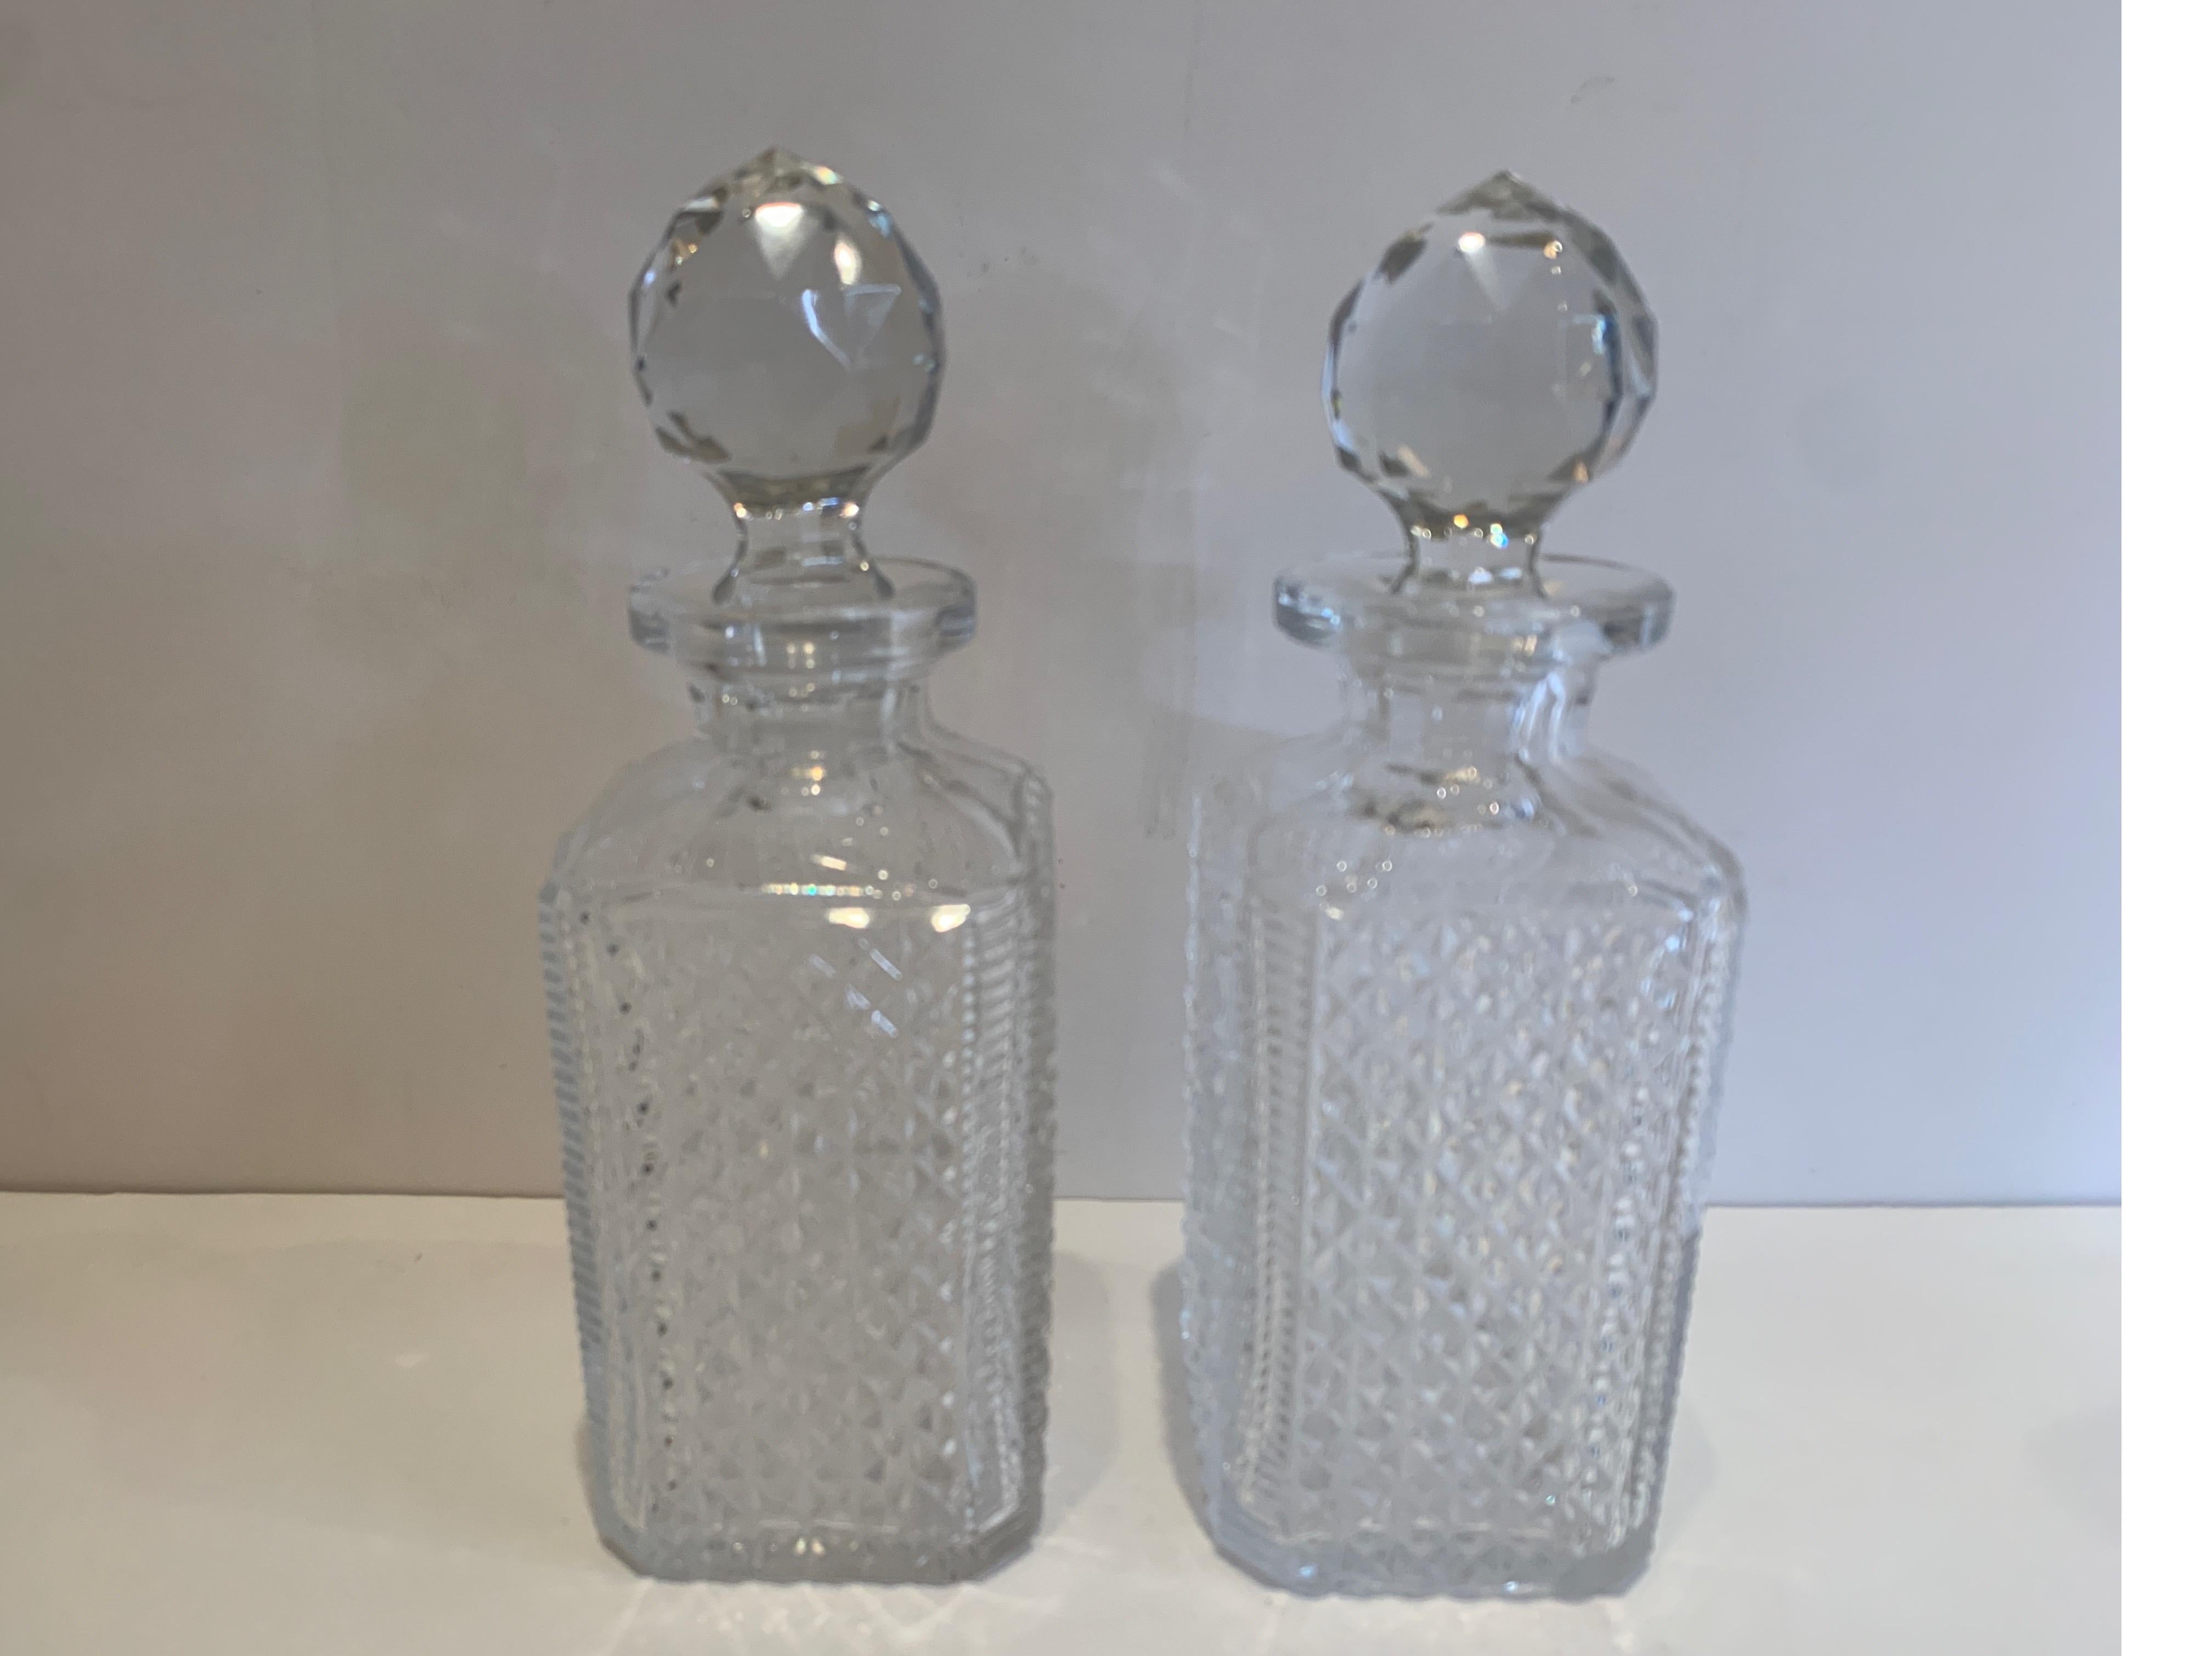 A beautifully cut pair of Baccarat whisky/scotch decanters with faceted stoppers. An original pair, each one handcut and polished on a cutters wheel, France, early 20th century.